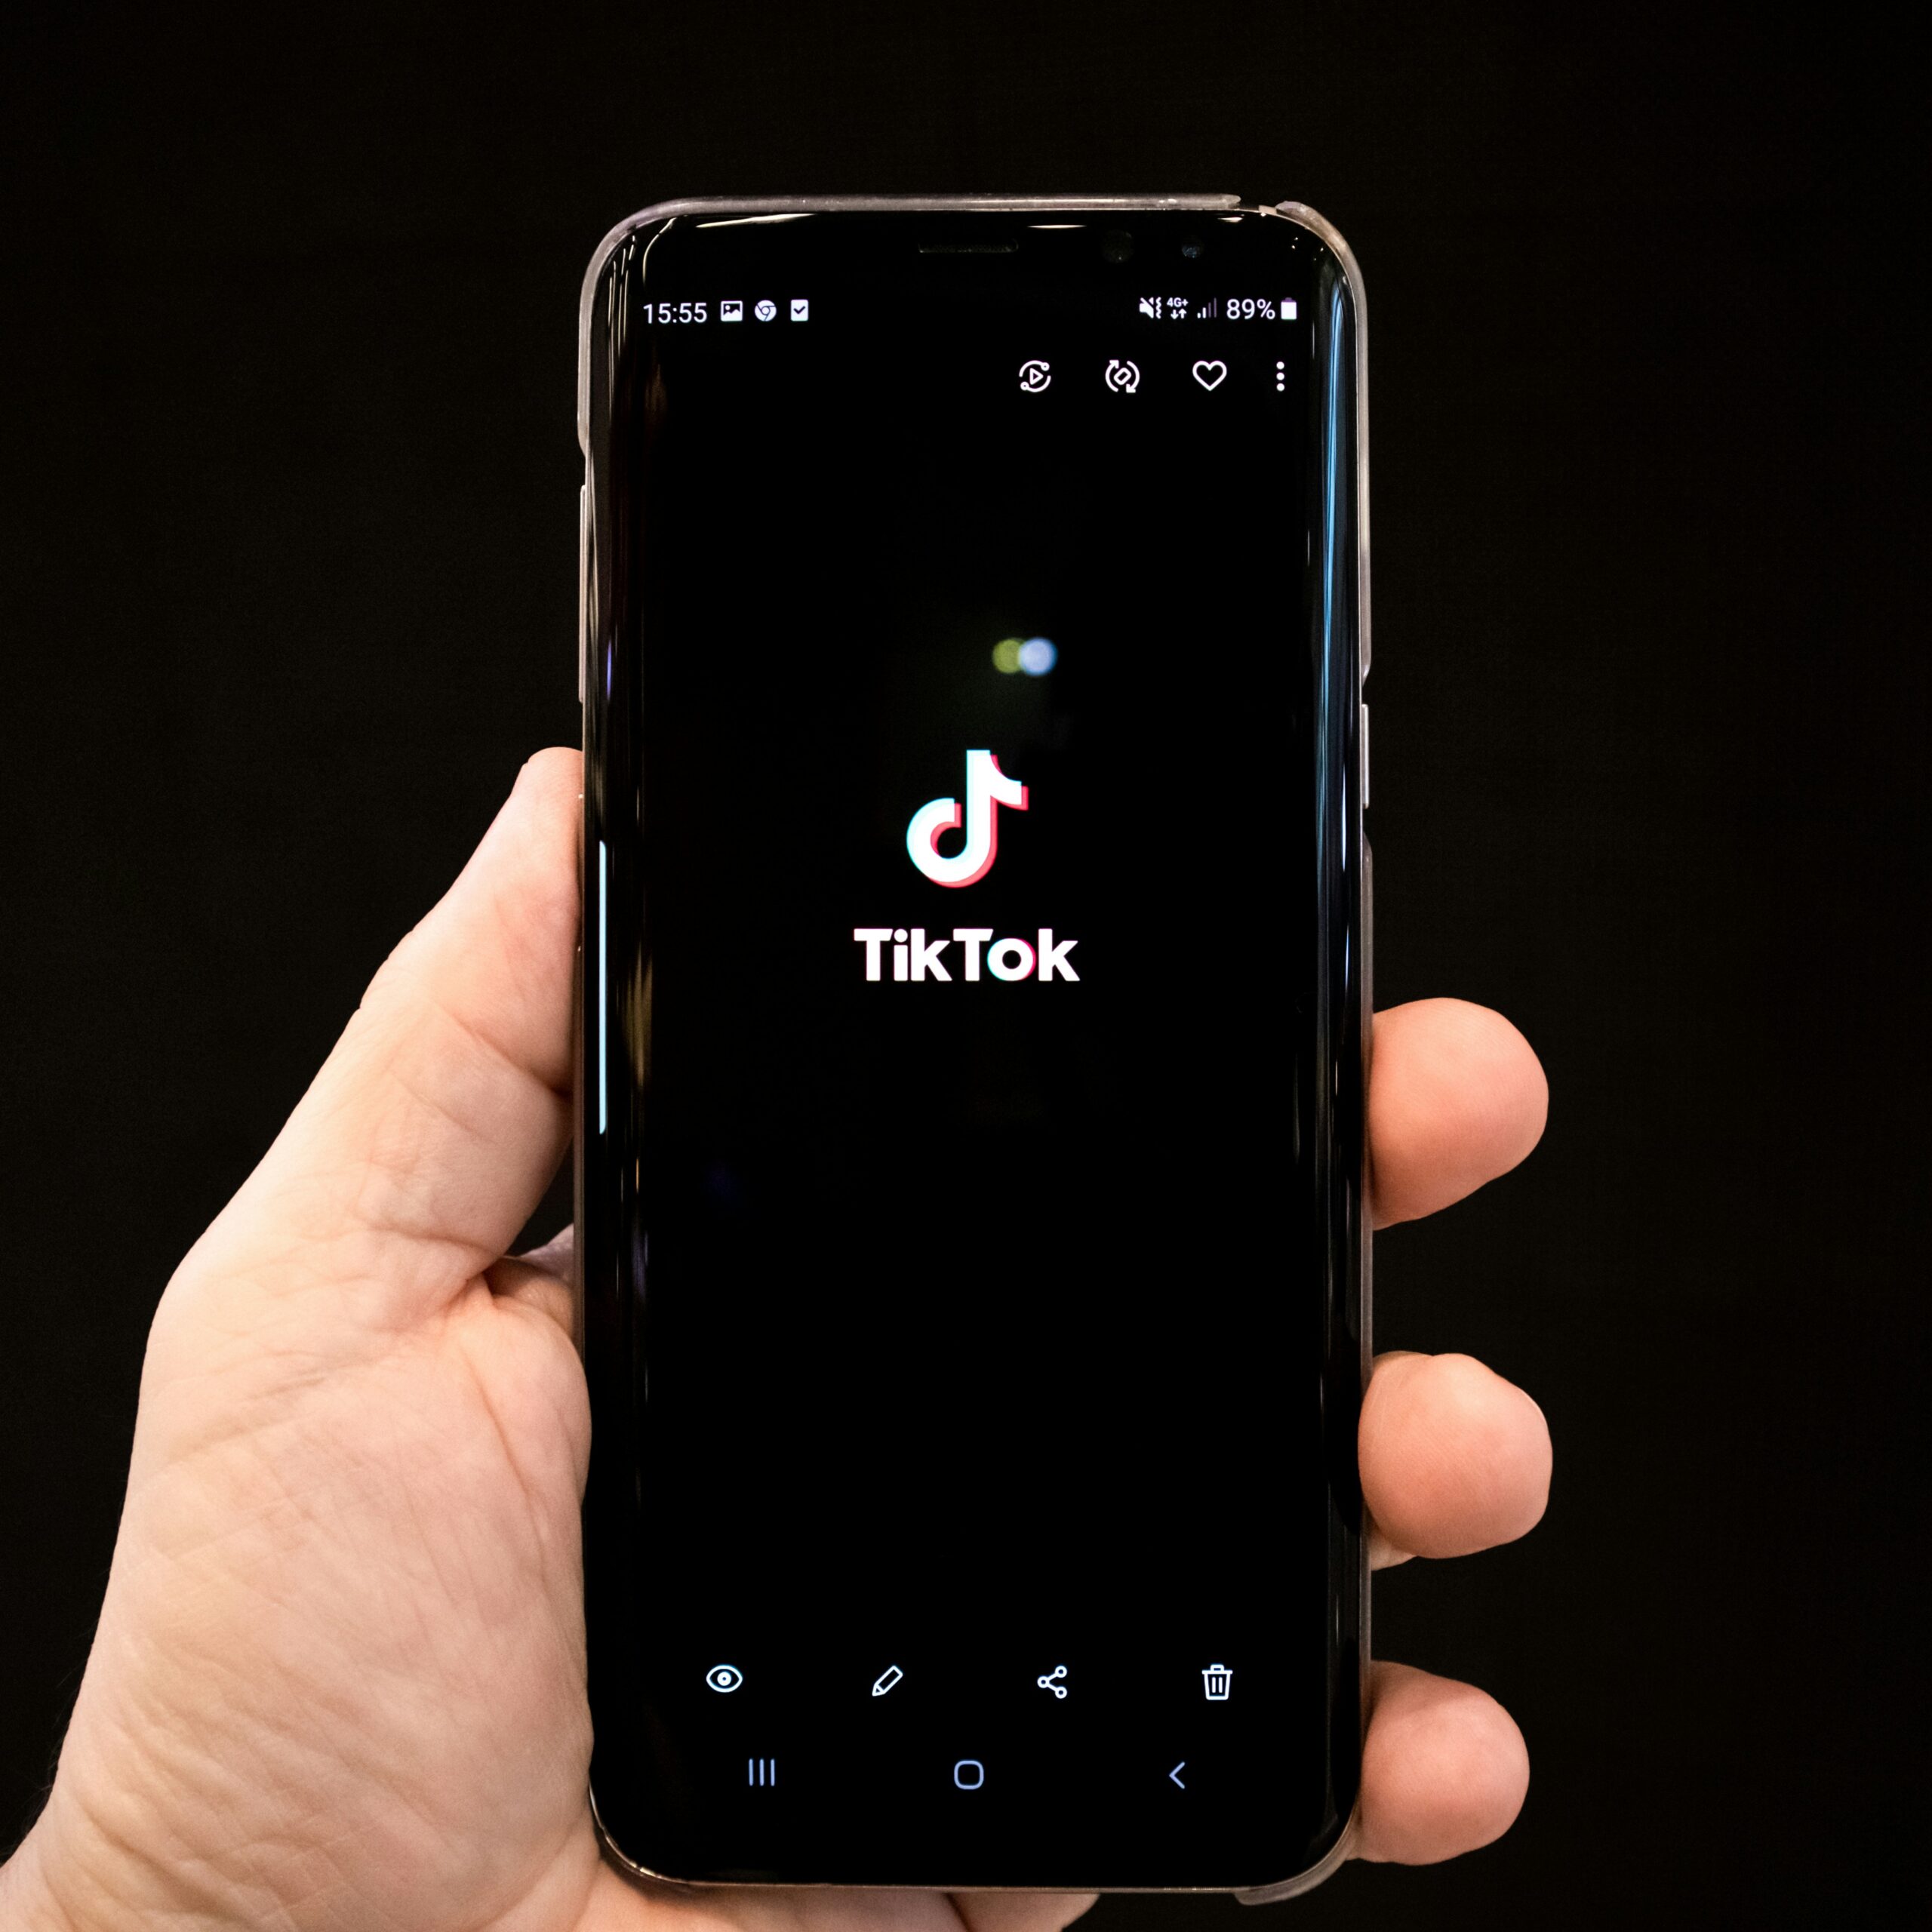 Tips for Live on TikTok to Get Crowded Viewers